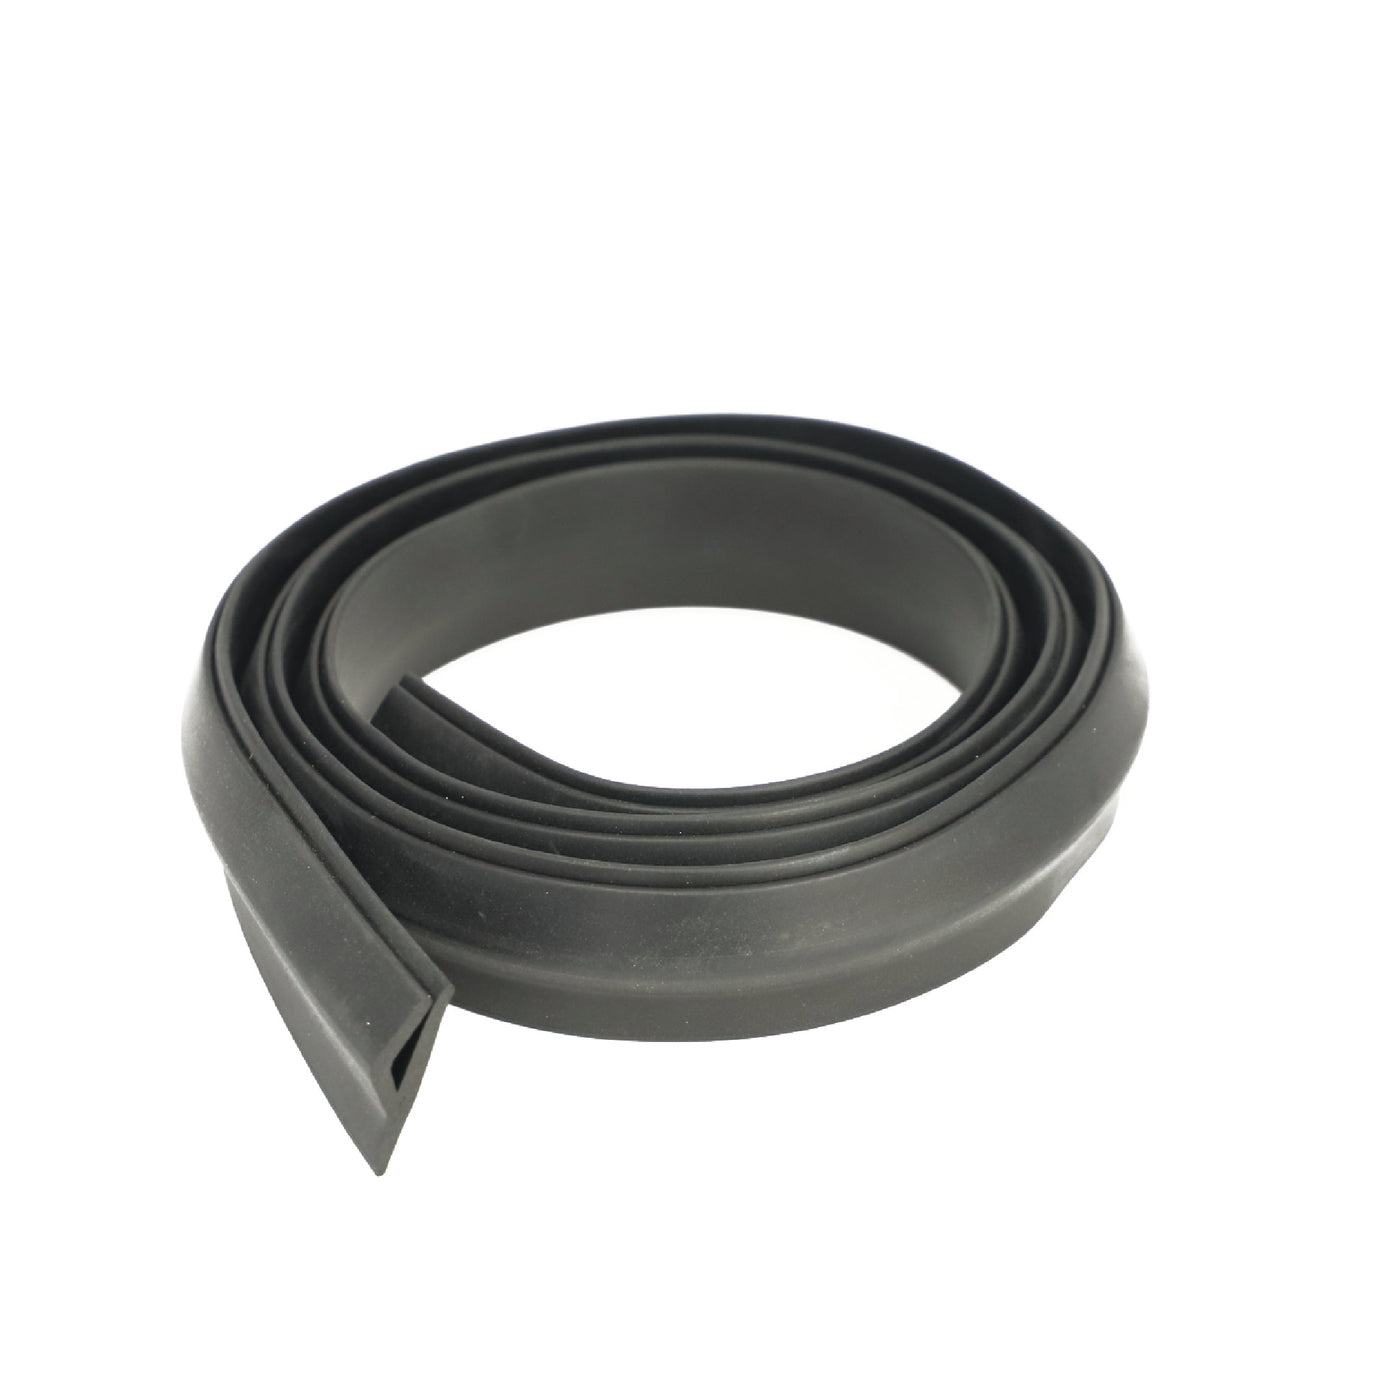 510/1600 Coupe SSS Rear bumper splash seal fits the rear body panel join between bumper & body